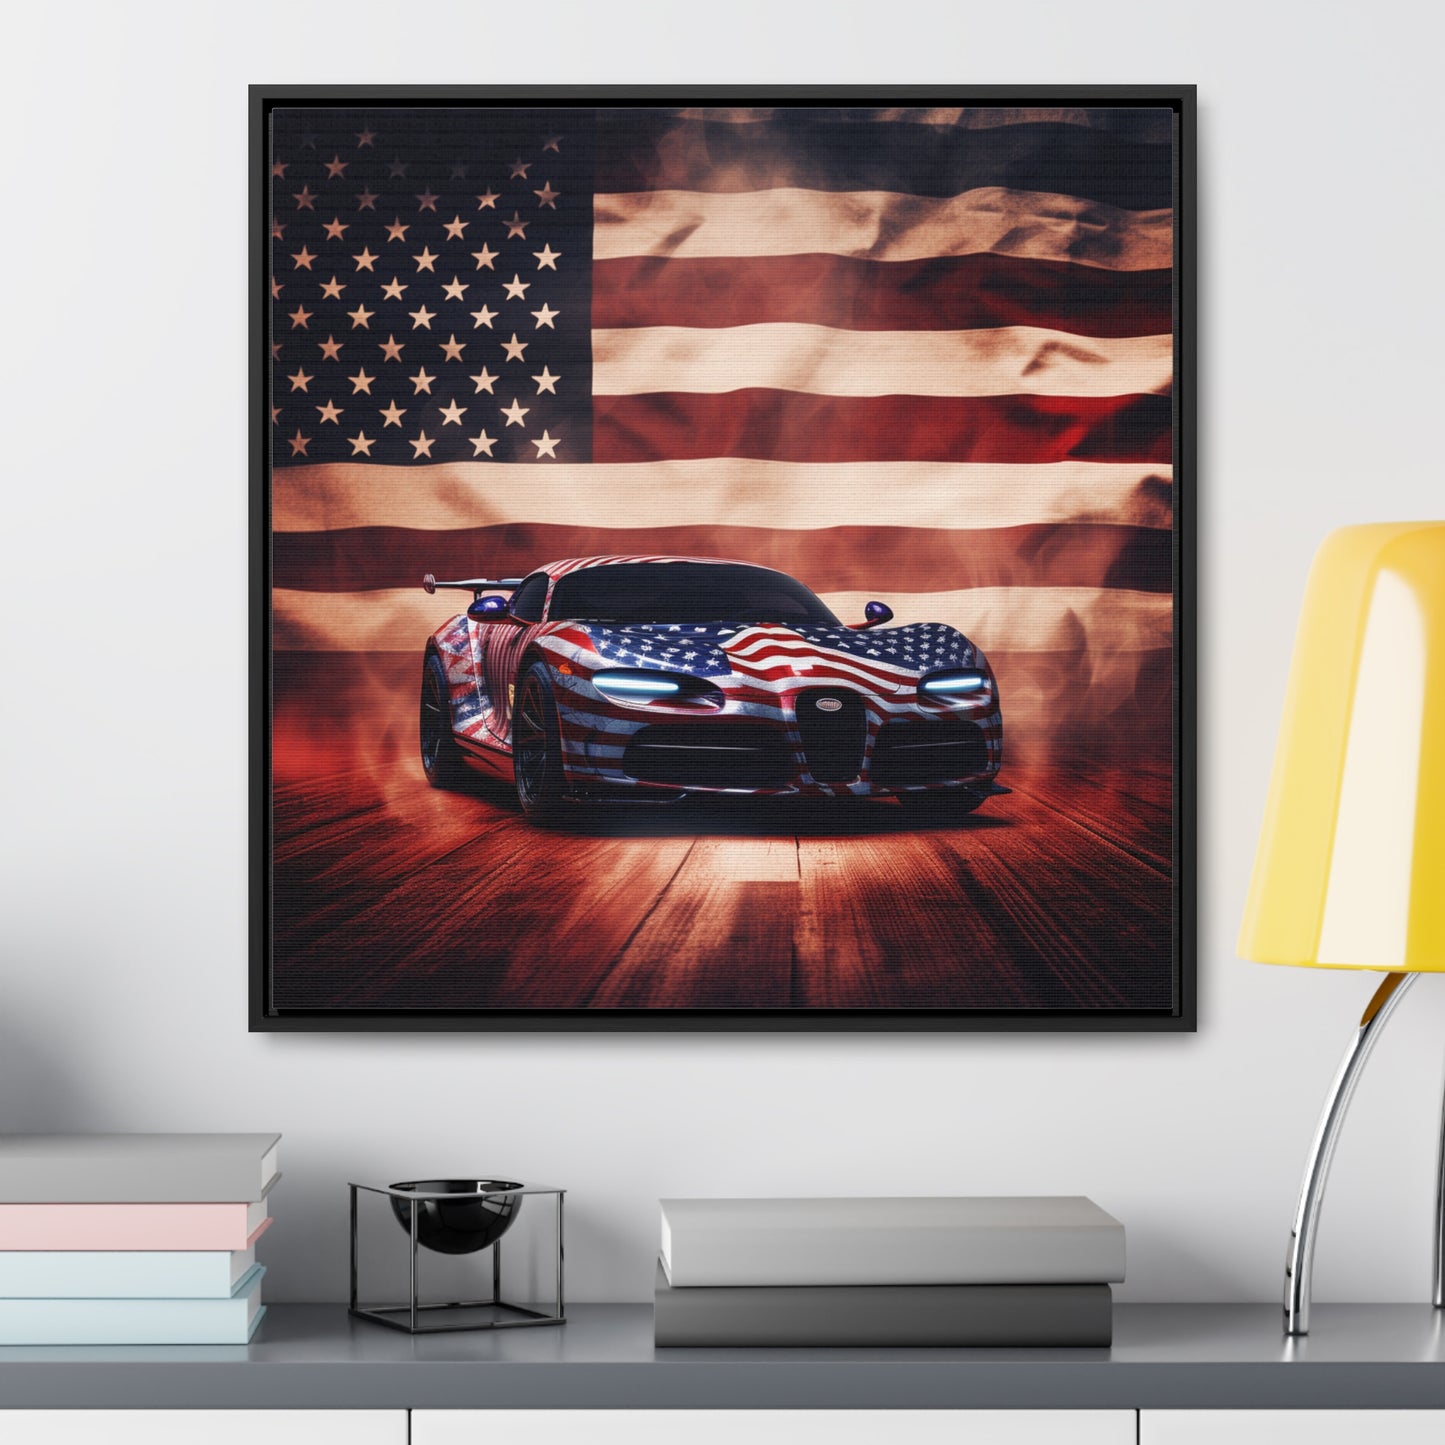 Gallery Canvas Wraps, Square Frame Abstract American Flag Background Bugatti 2